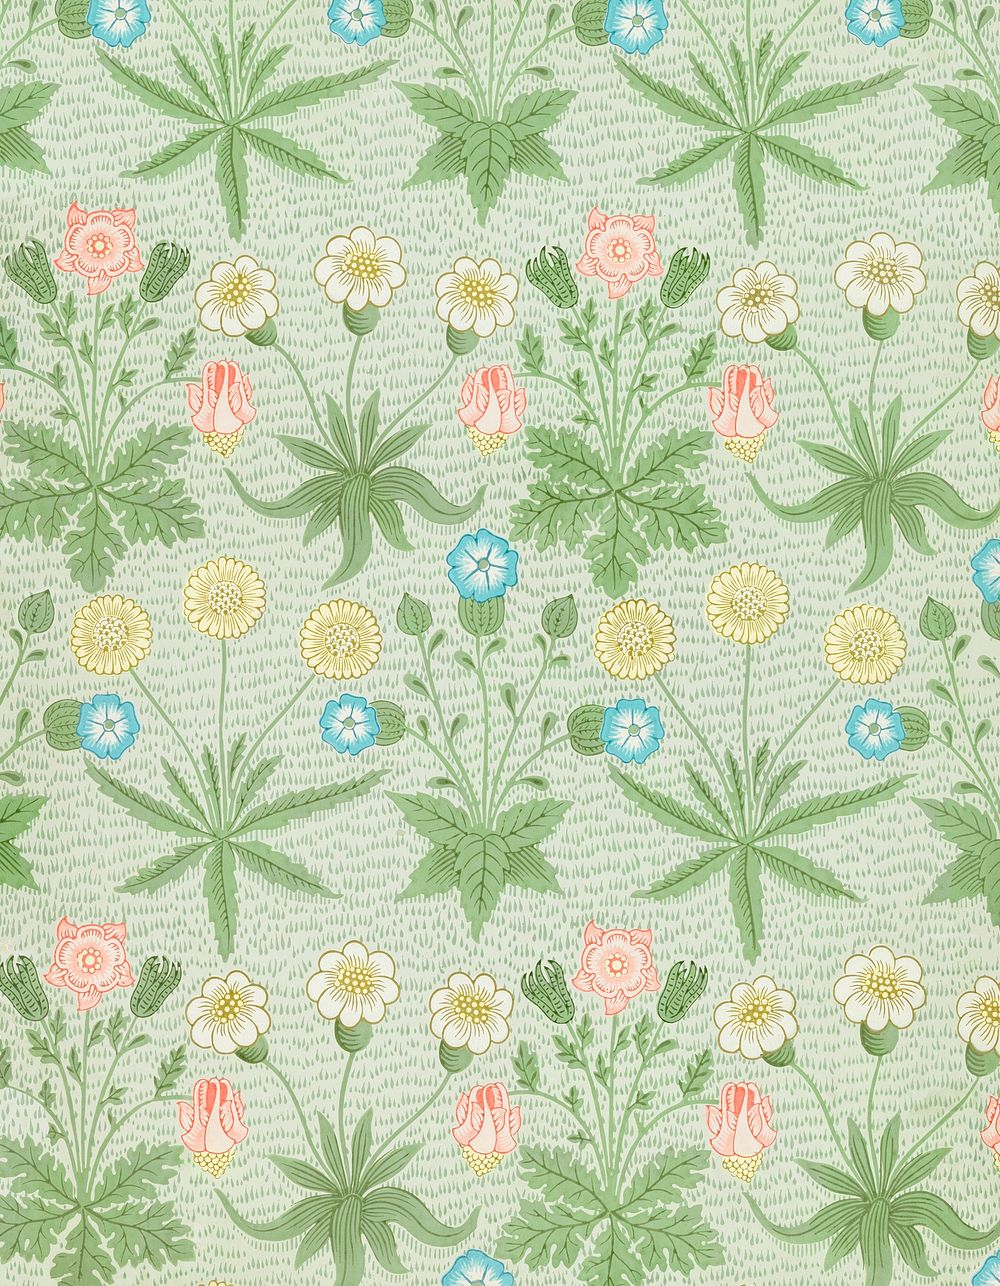 William Morris's Daisy (1864) famous pattern. Original from The Smithsonian Institution. Digitally enhanced by rawpixel.